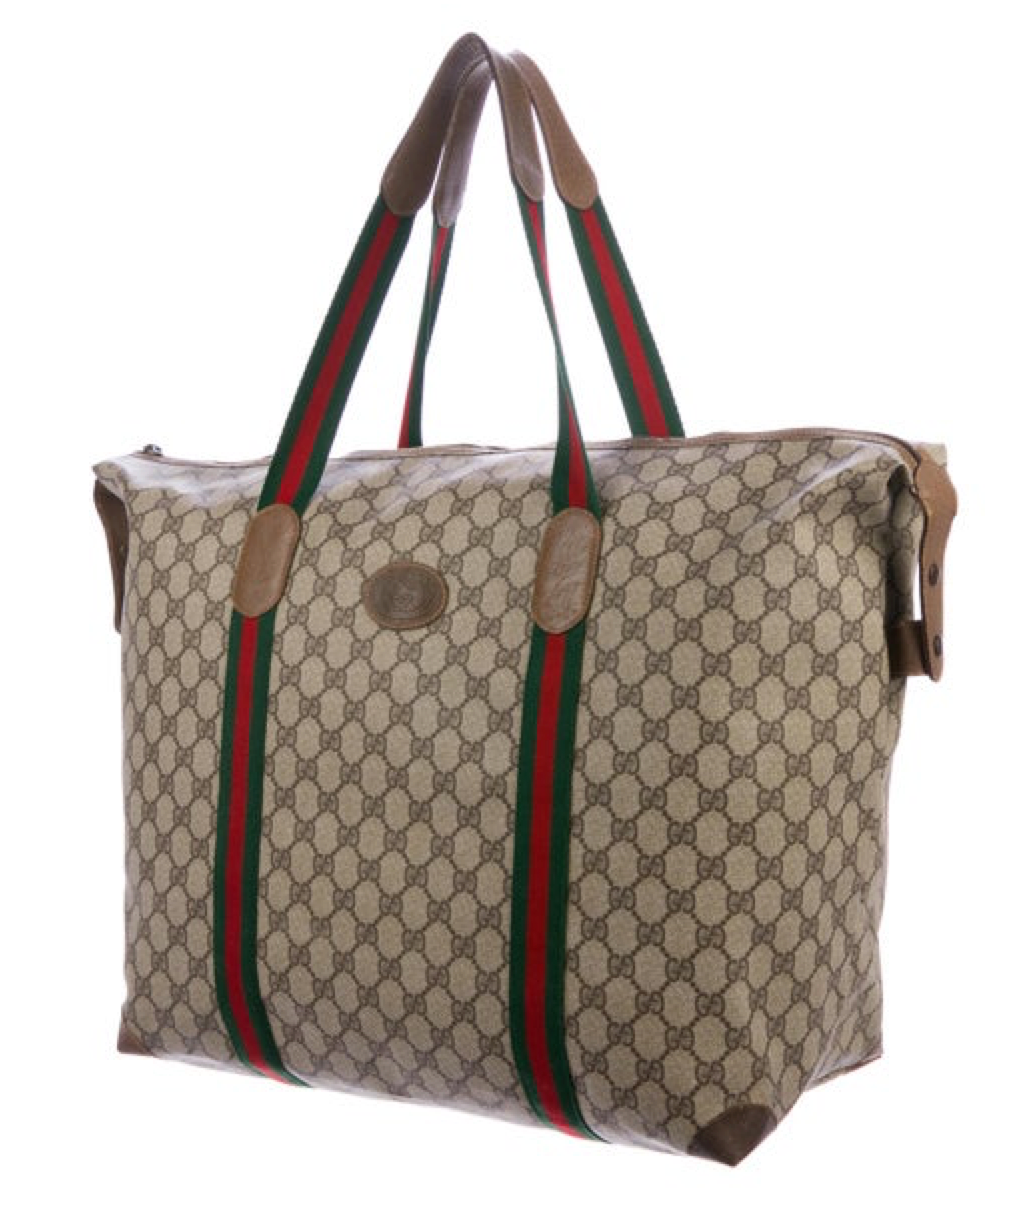 gucci oversized bag